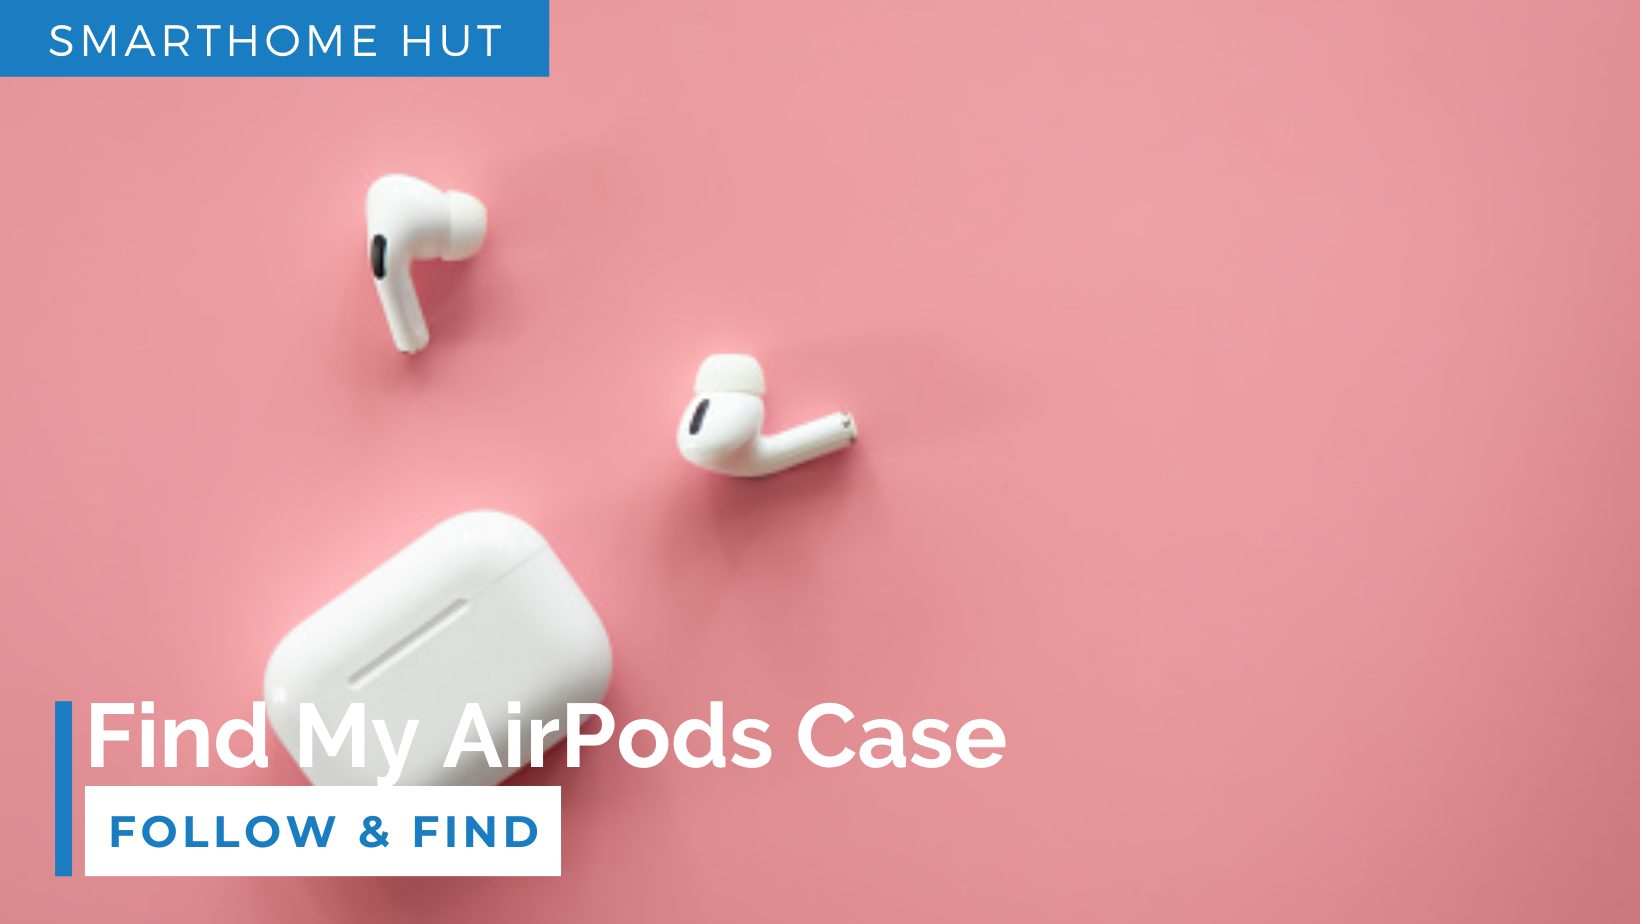 How to Find My AirPods Case